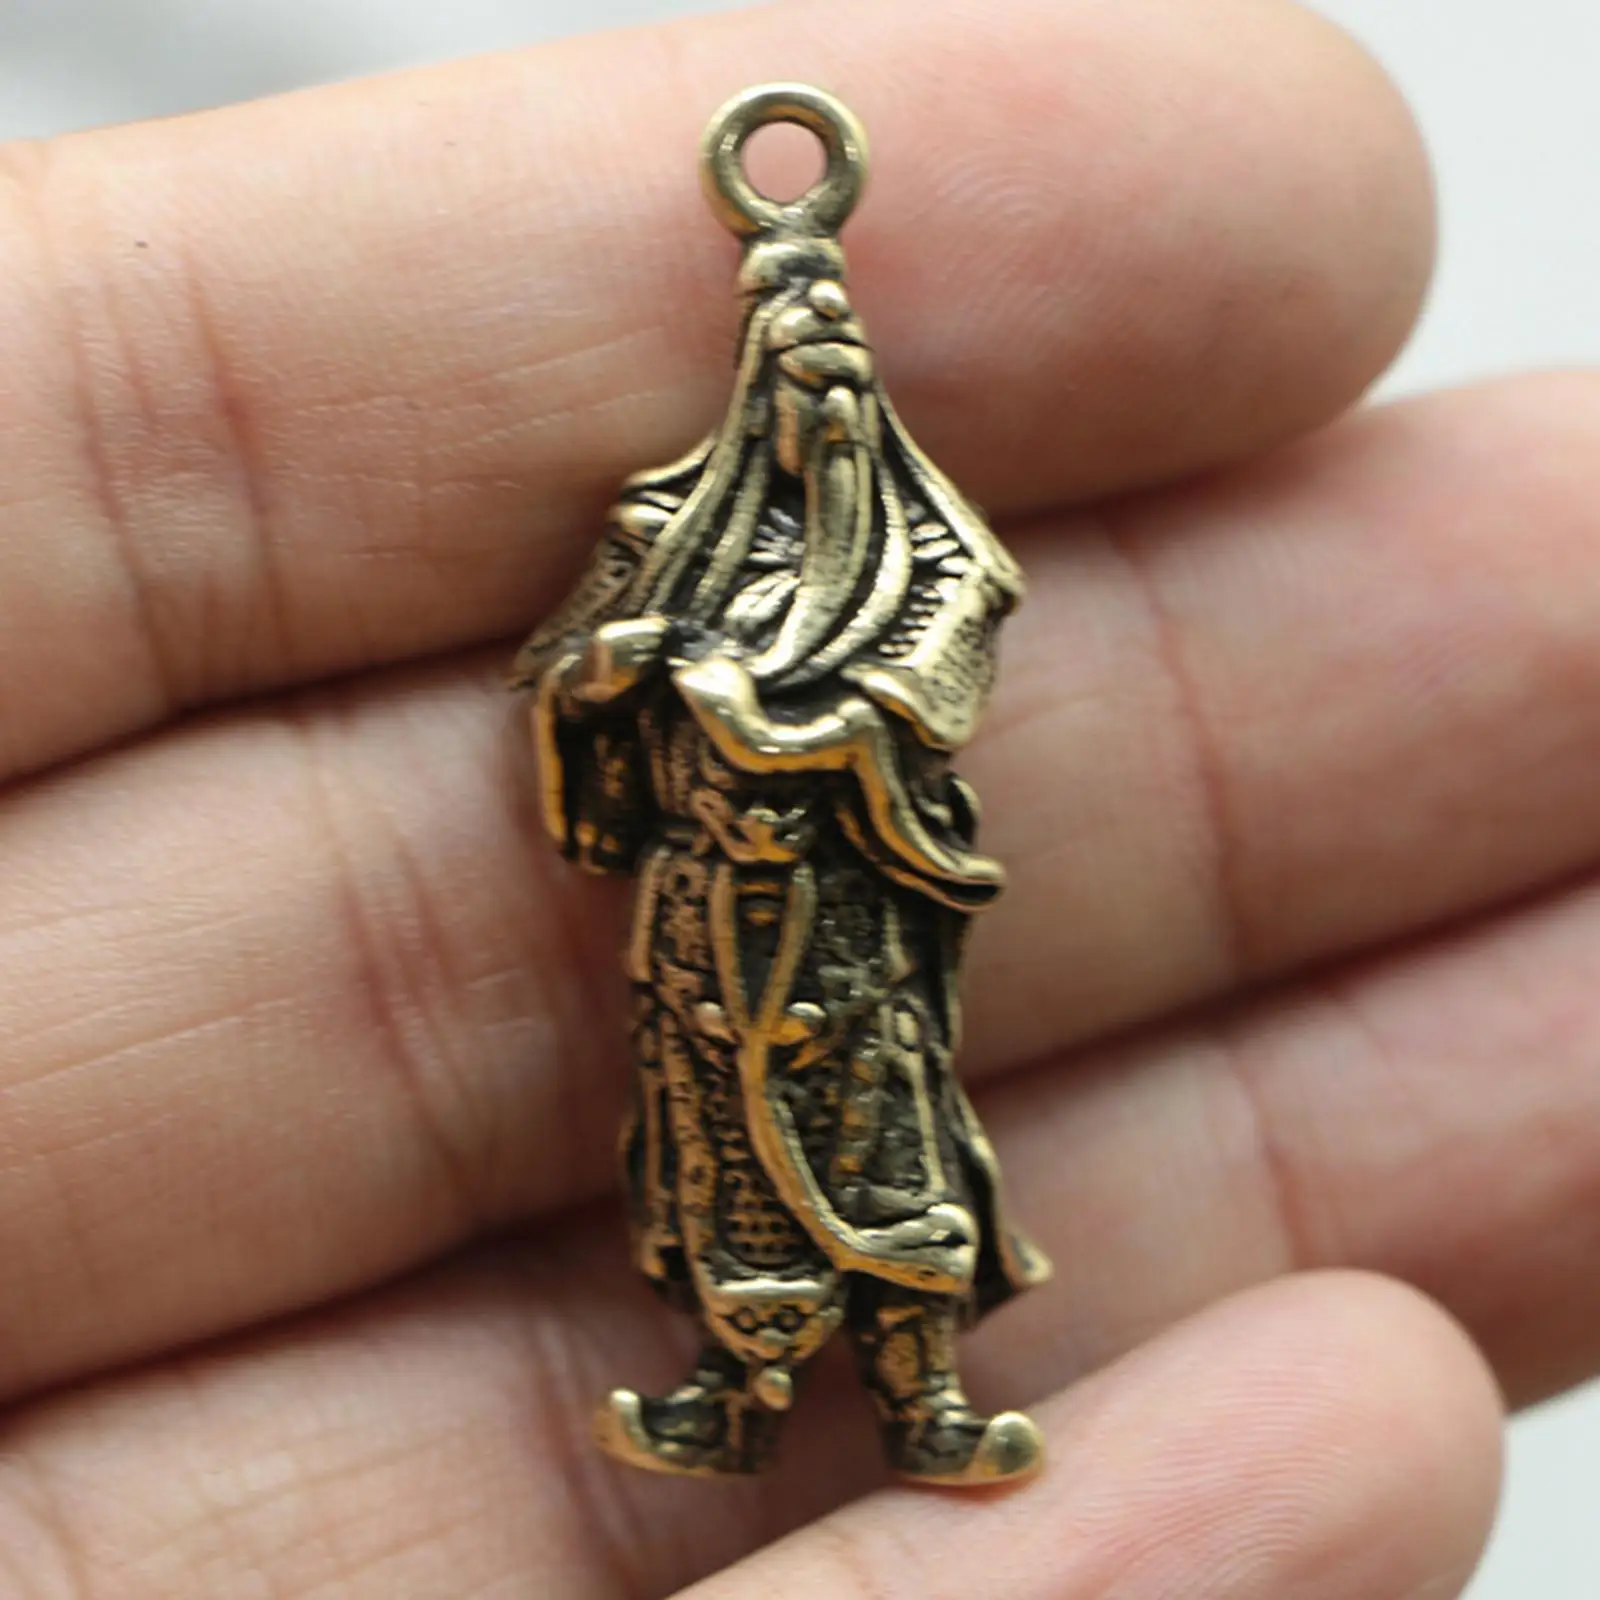 5 Pieces Copper Small Statues Figurine Novelty Gift Pendant Collectible for Decor Keychains Home Decoration Bracelet Necklace